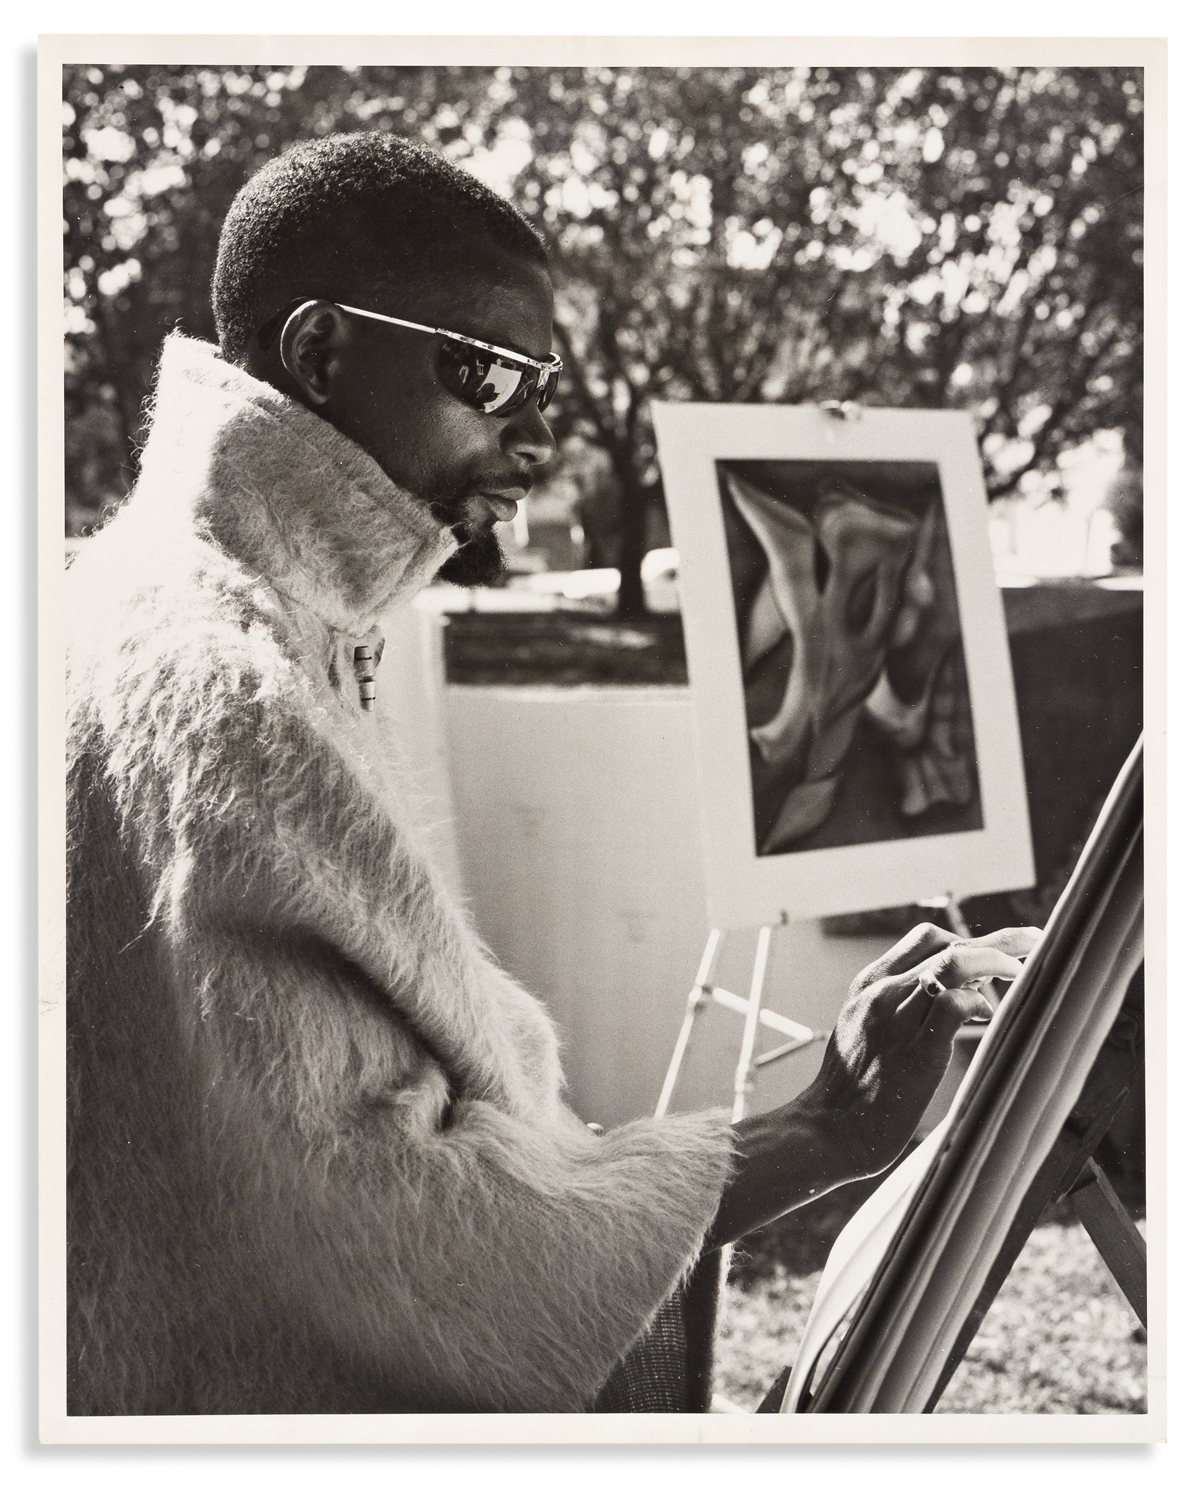 (ART.) Folder of publicity materials on Black artists compiled by a California art critic.